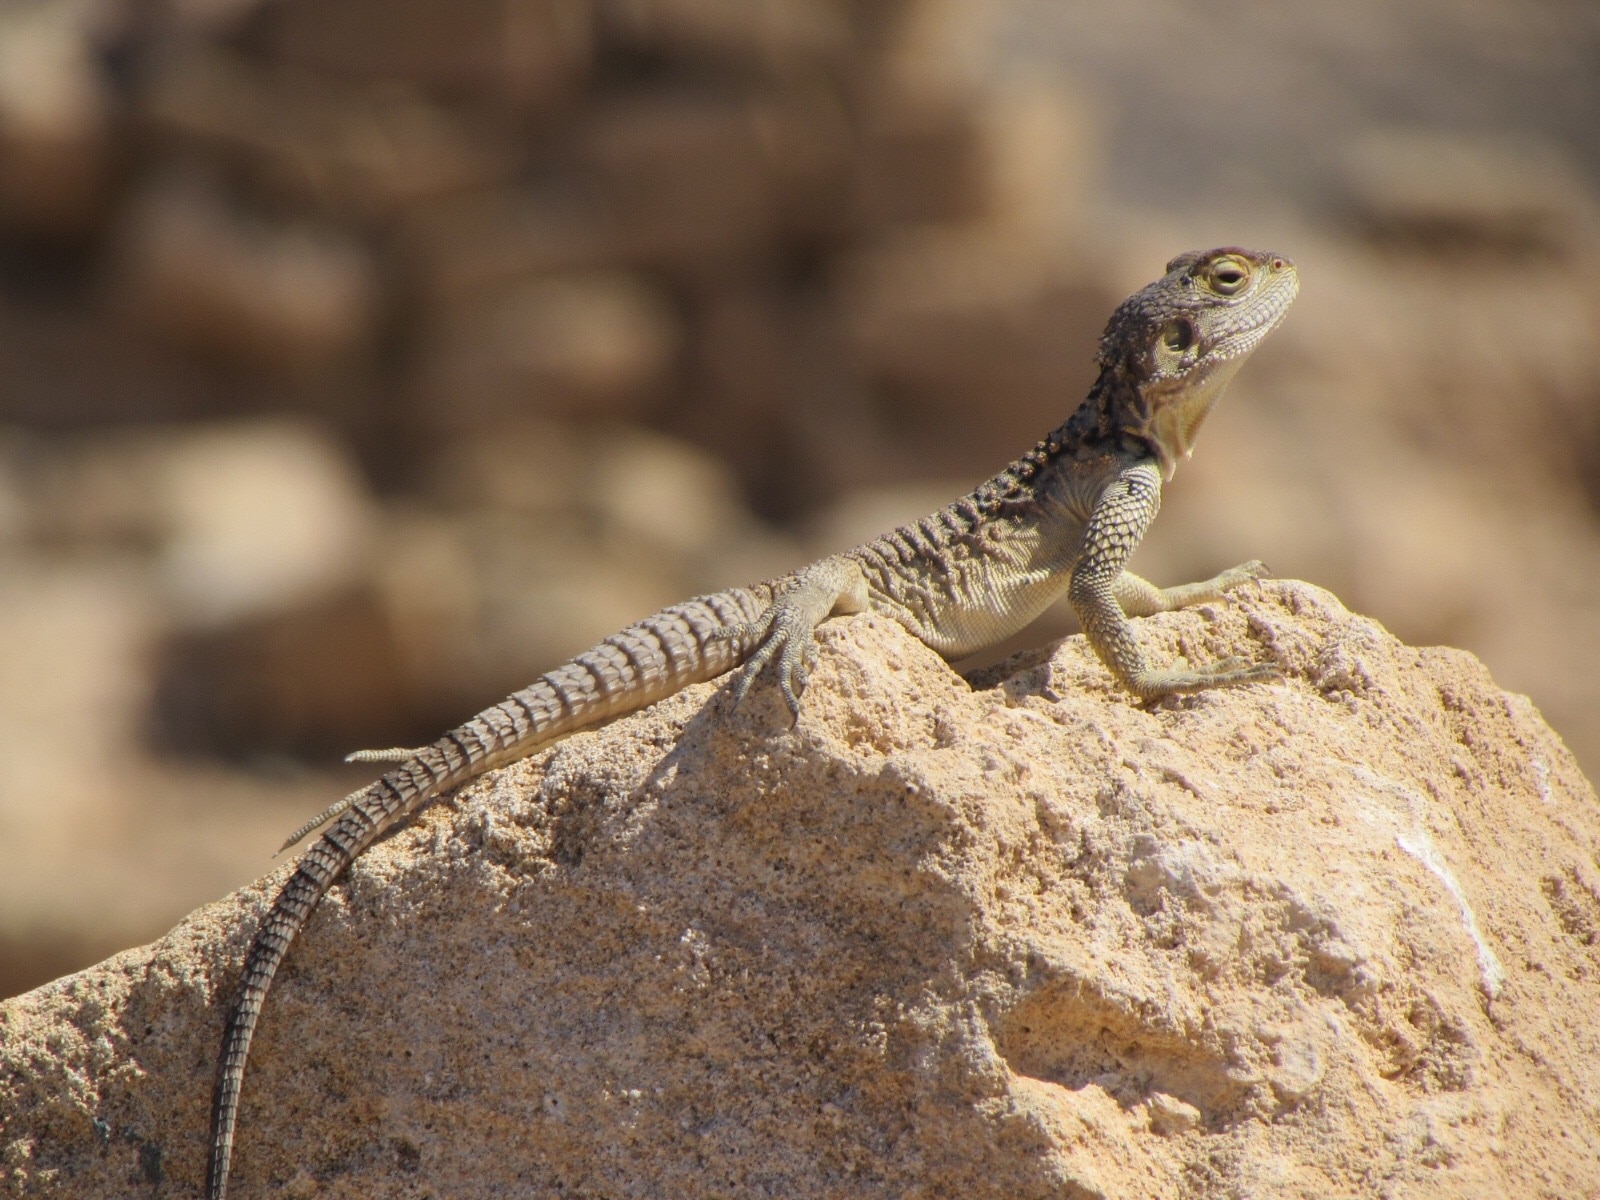 Found this wee guy sunning himself on the archaeological remains in Paphos